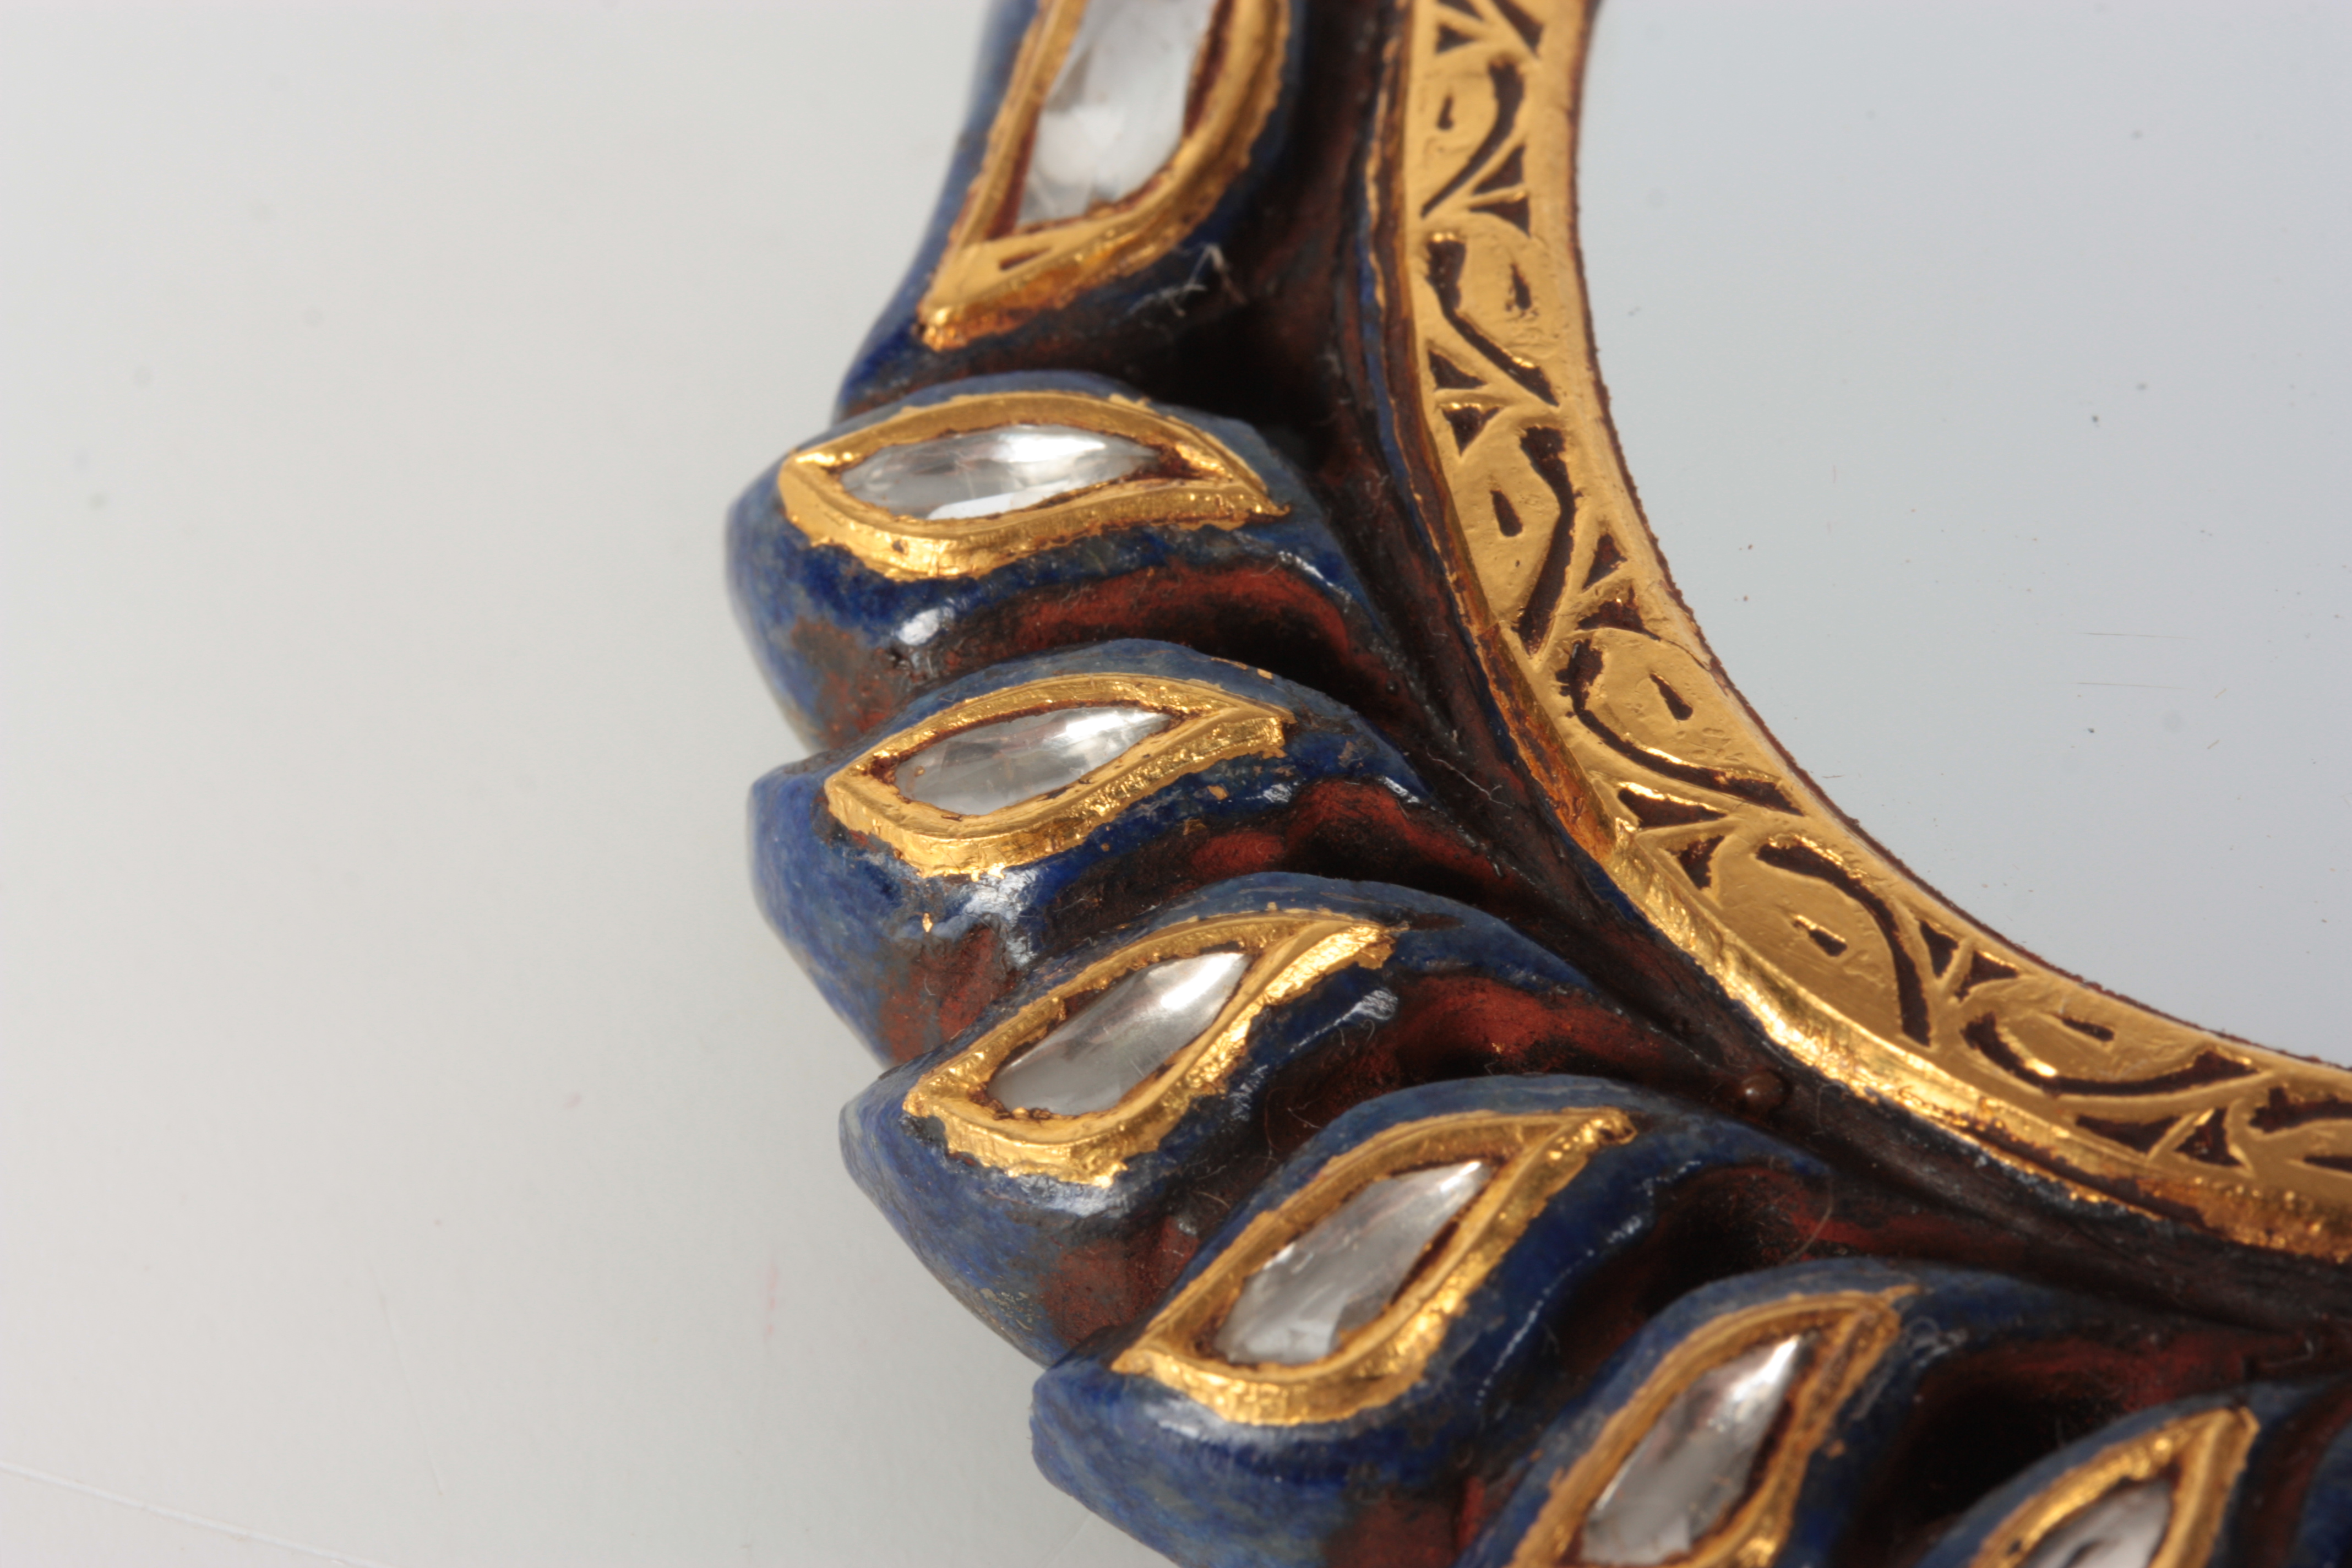 AN 20TH CENTURY LAPIS LAZULI AND DIAMOND SET CARVED HAND MIRROR the peacock and twisted handle - Image 4 of 6